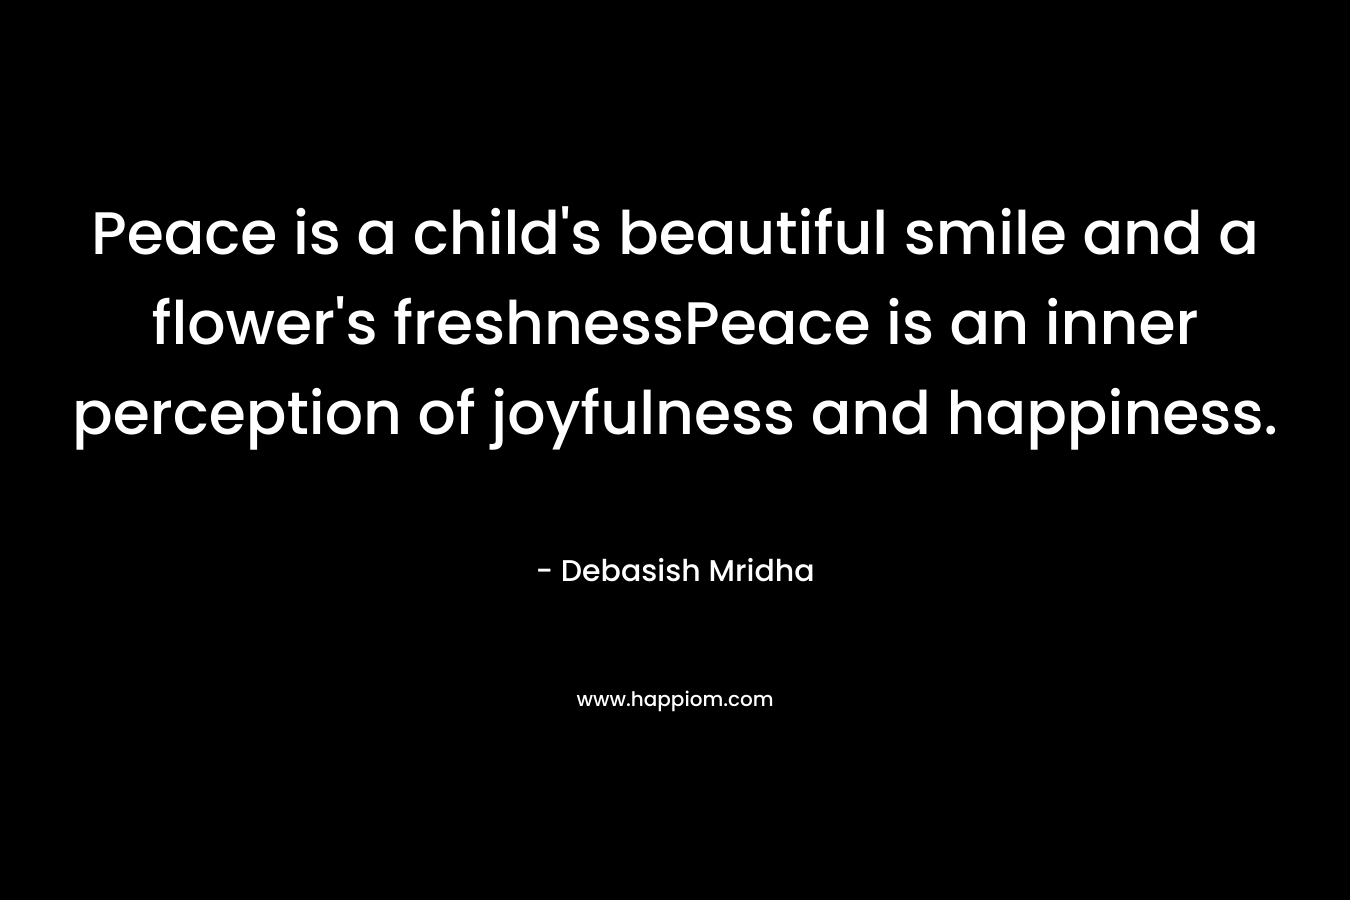 Peace is a child's beautiful smile and a flower's freshnessPeace is an inner perception of joyfulness and happiness.